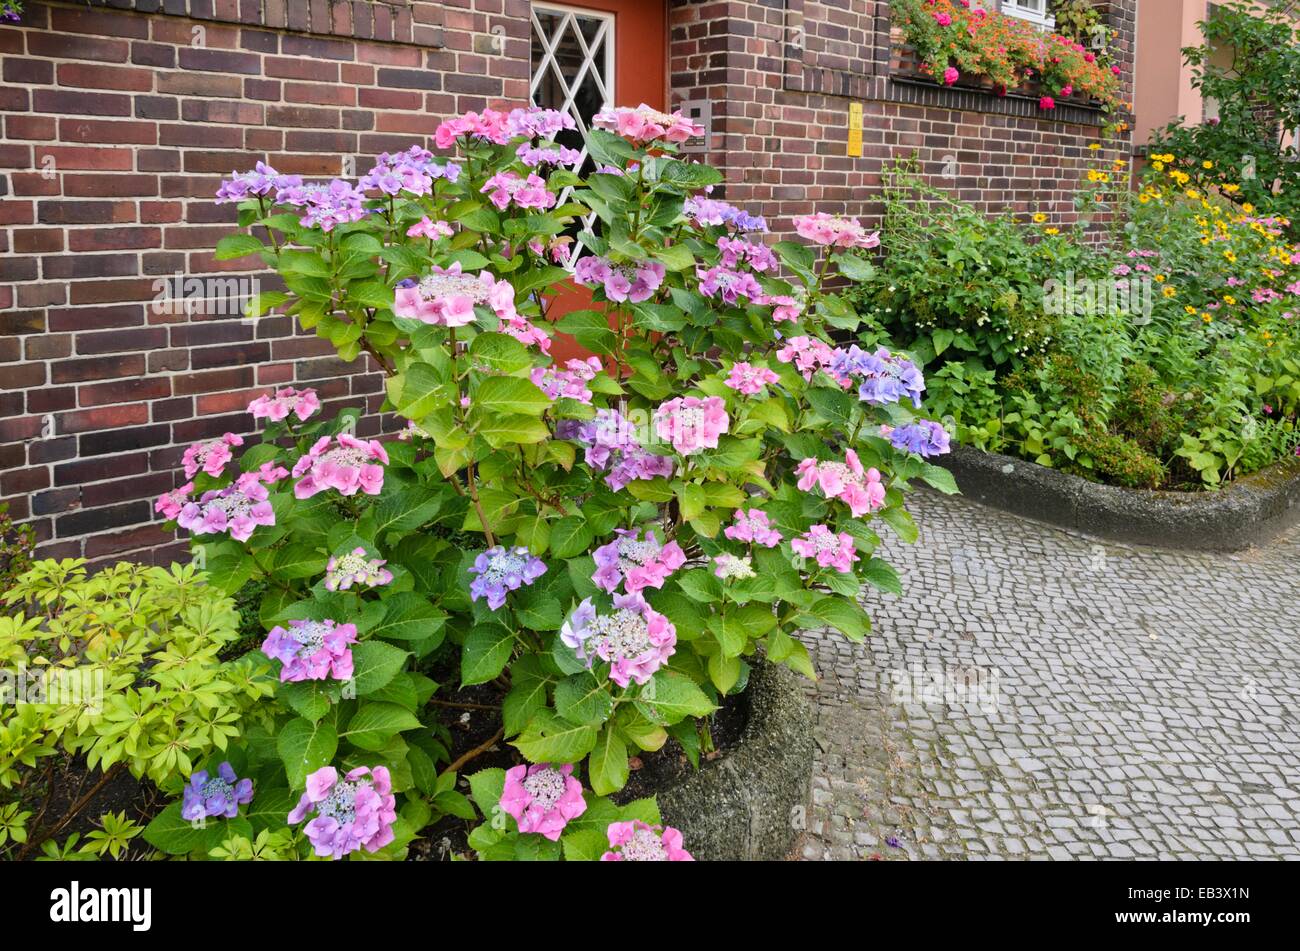 Big-leaved hydrangea (Hydrangea macrophylla) in the front garden of an apartment building Stock Photo